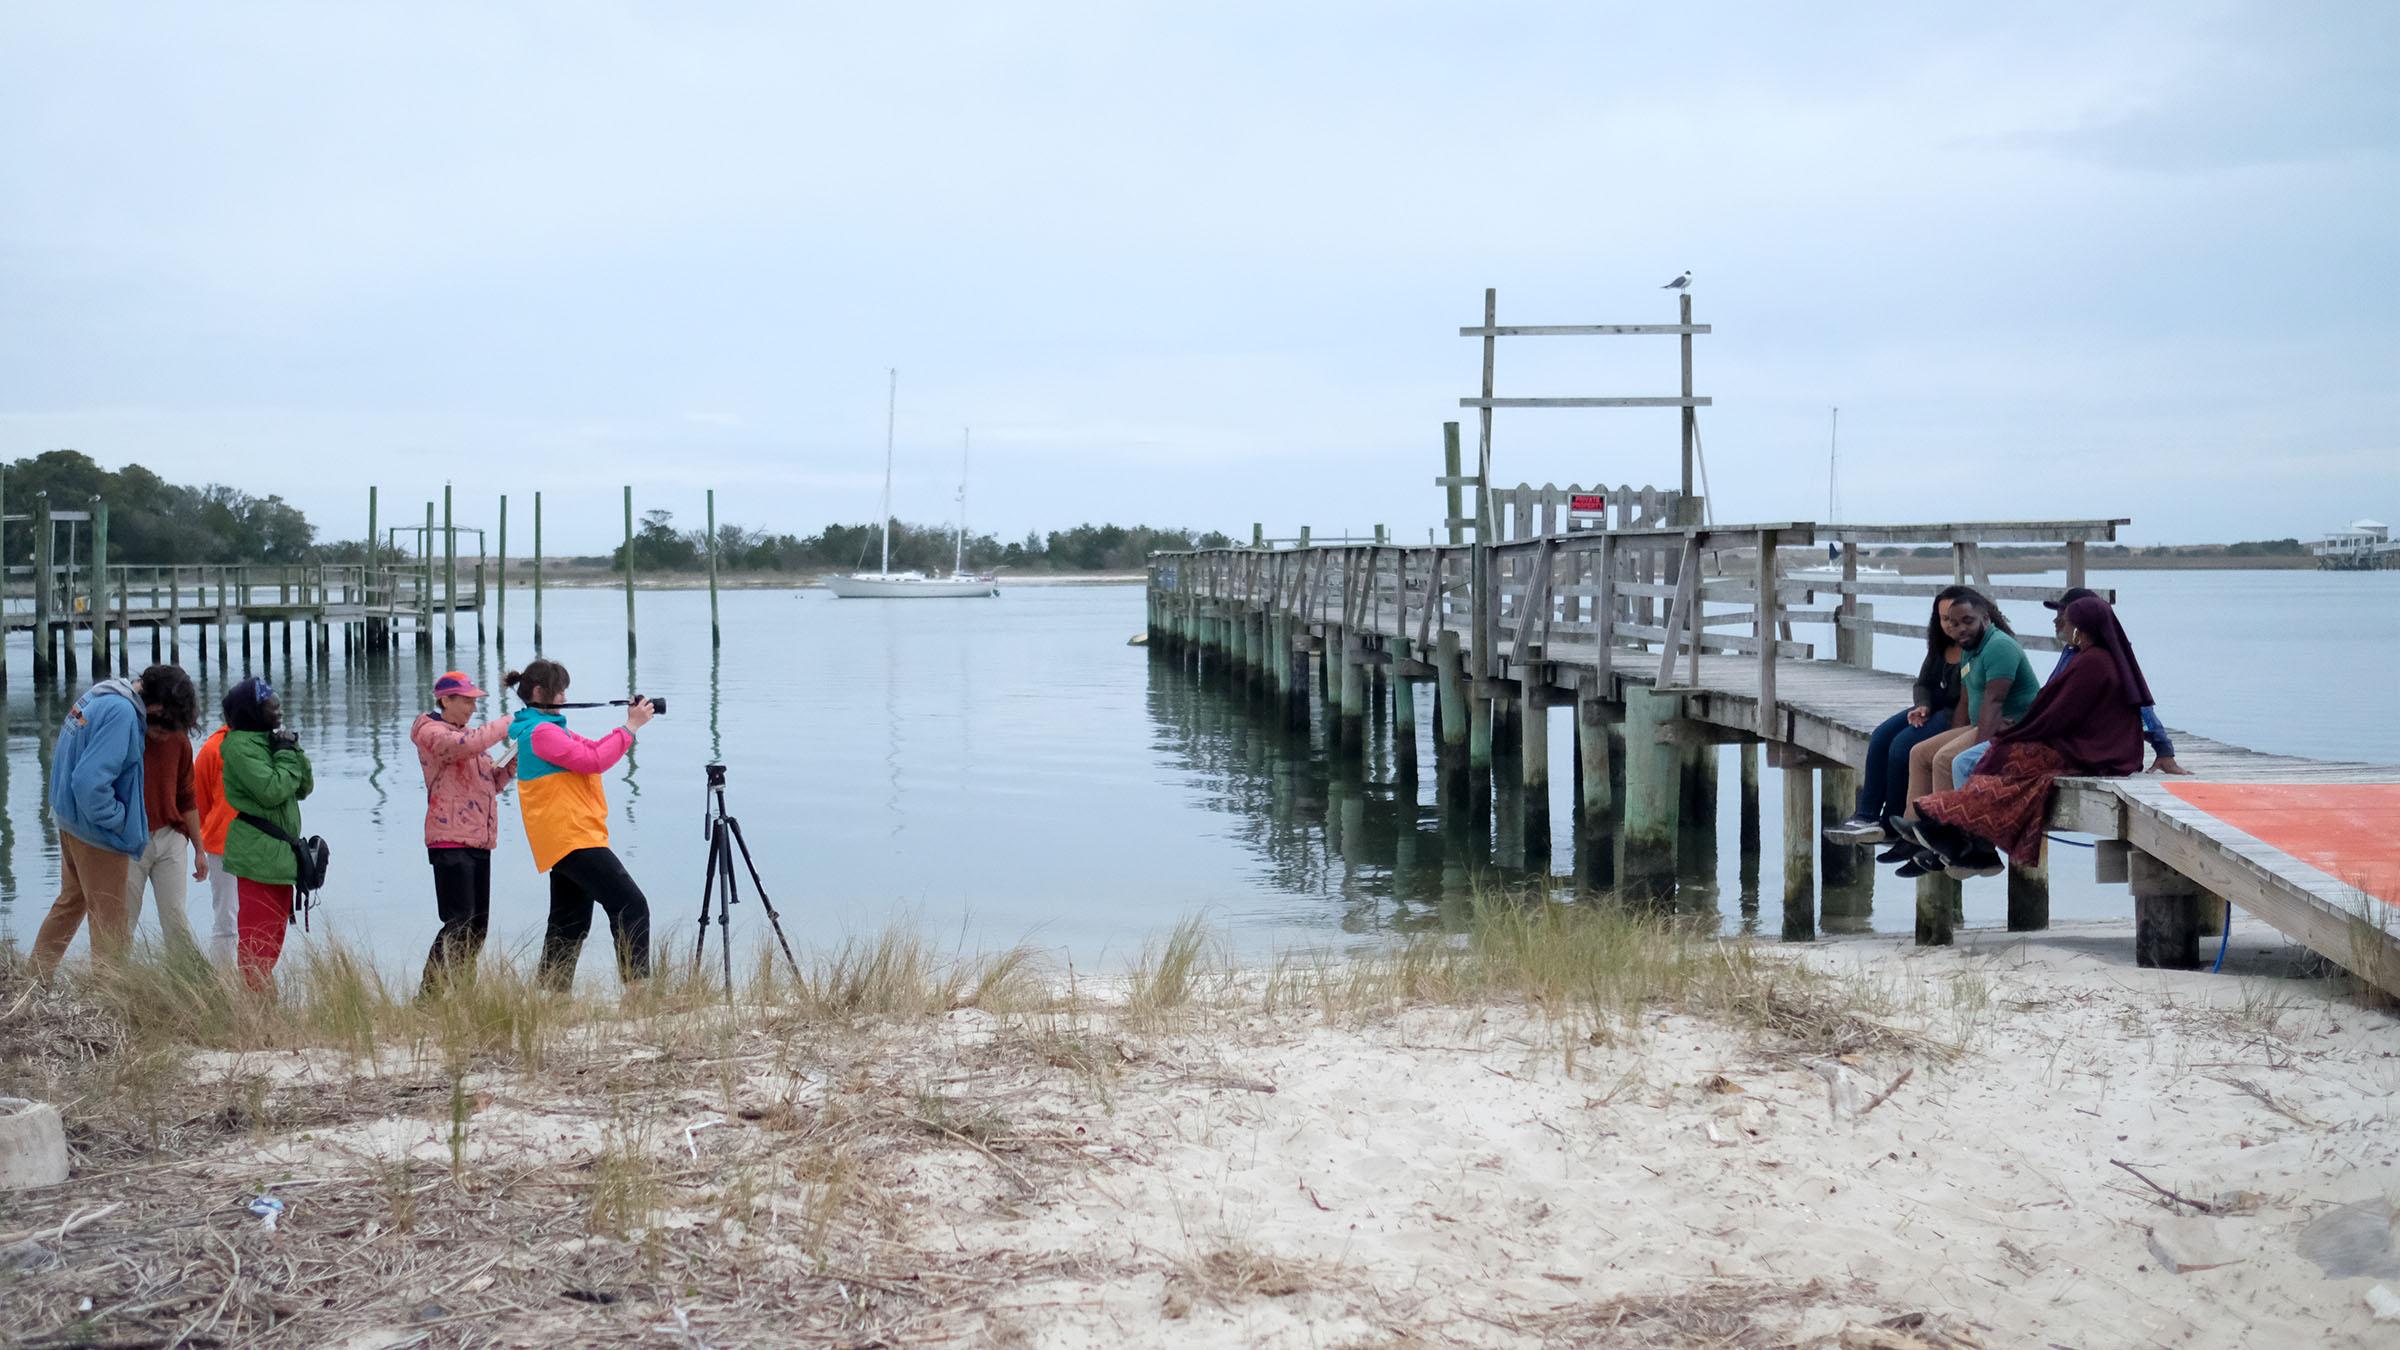 Emerging Media Arts students filming on set along a shoreline and dock in Seabreeze.